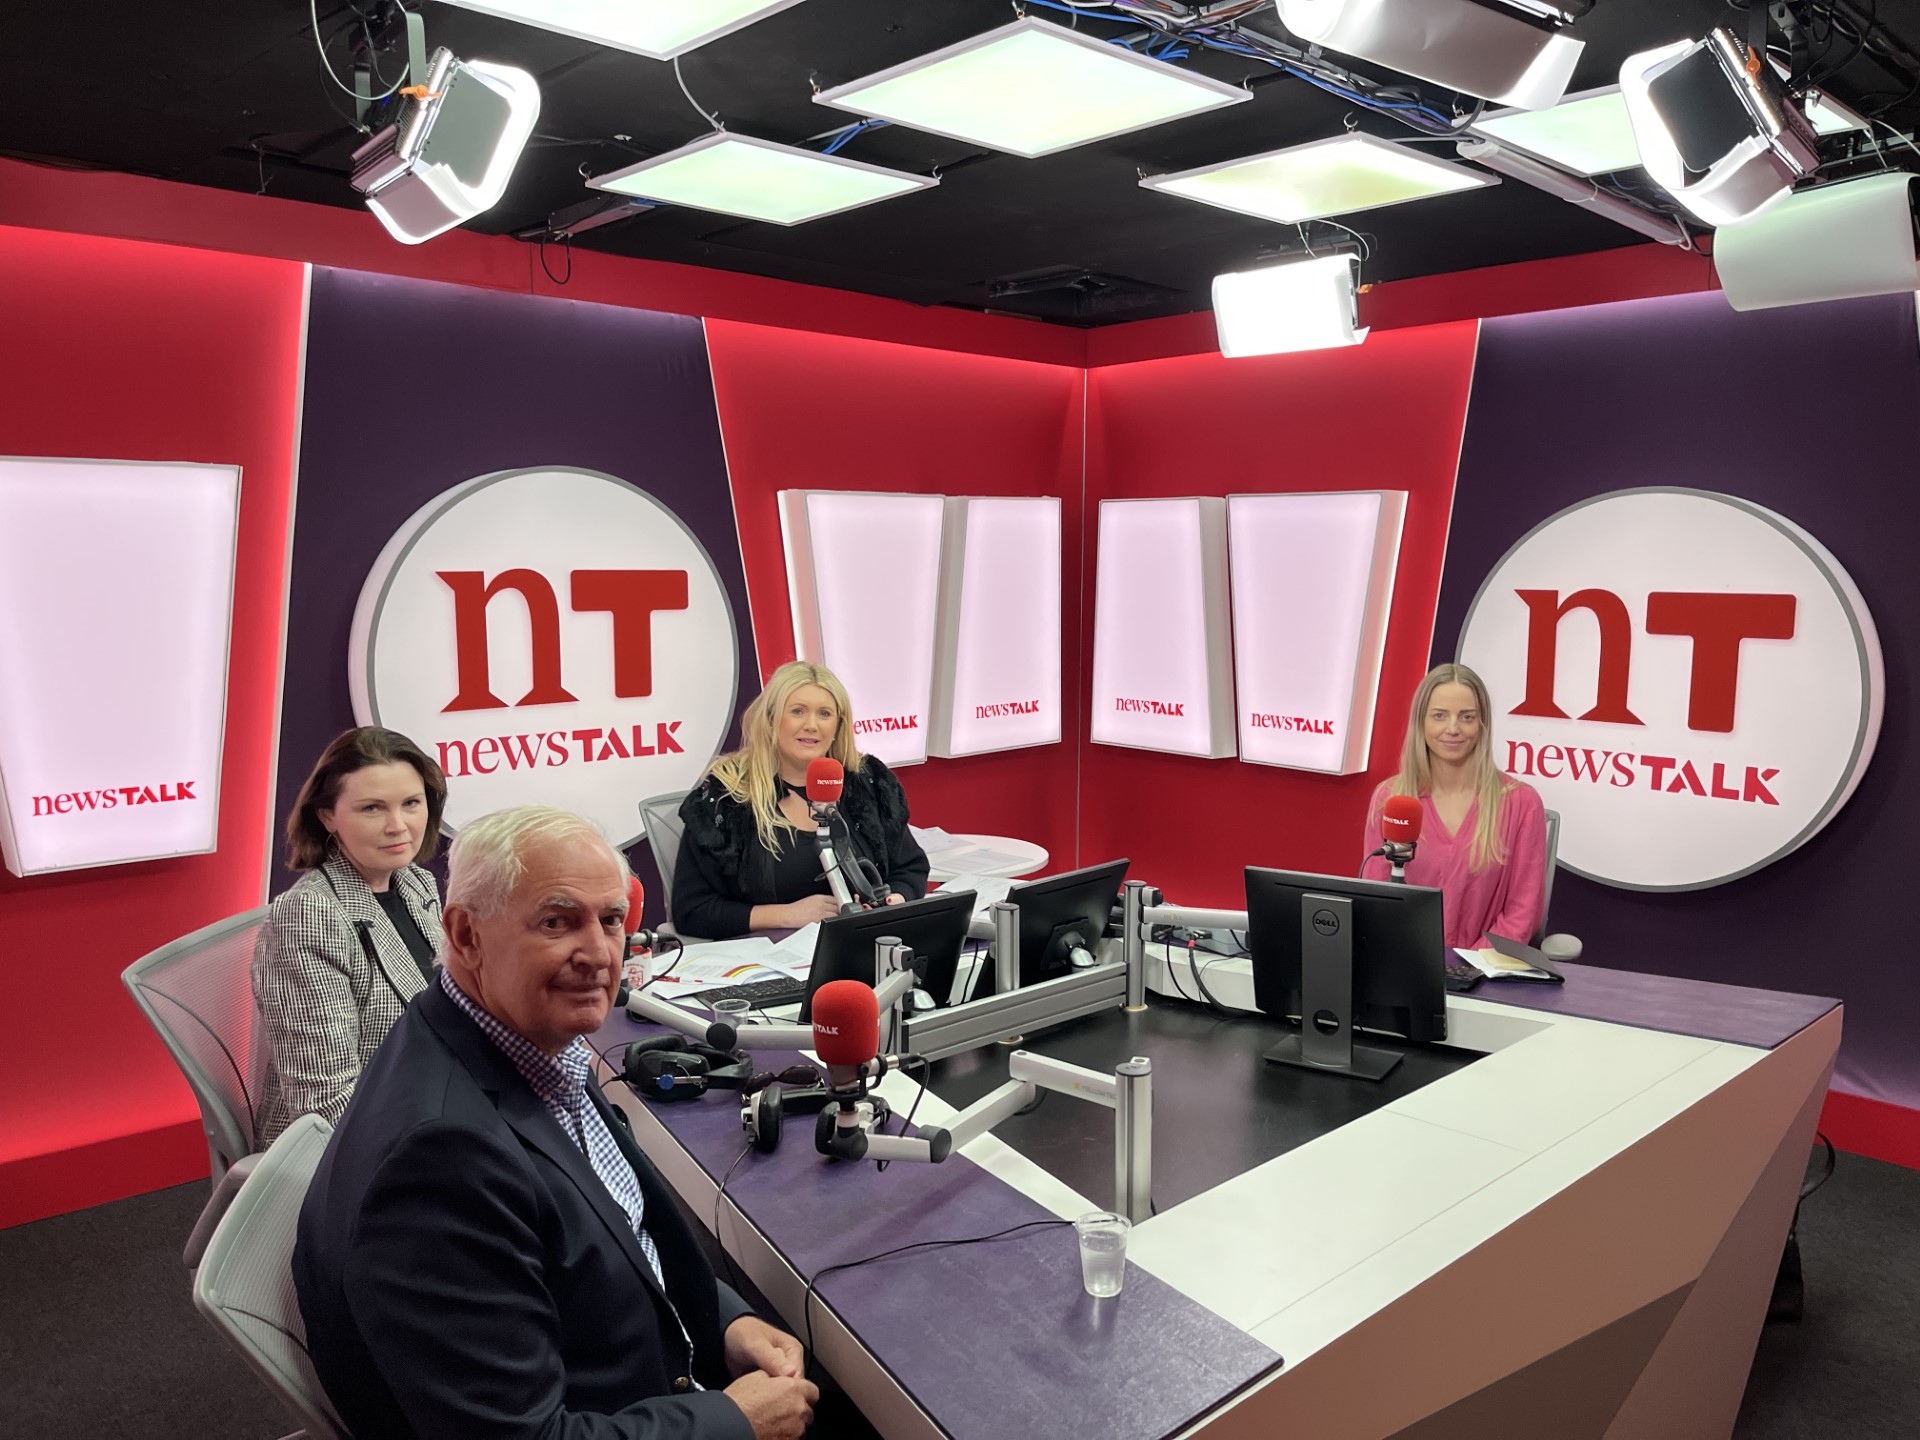 Lunchtime Live convened a panel to discuss the condition of endometriosis